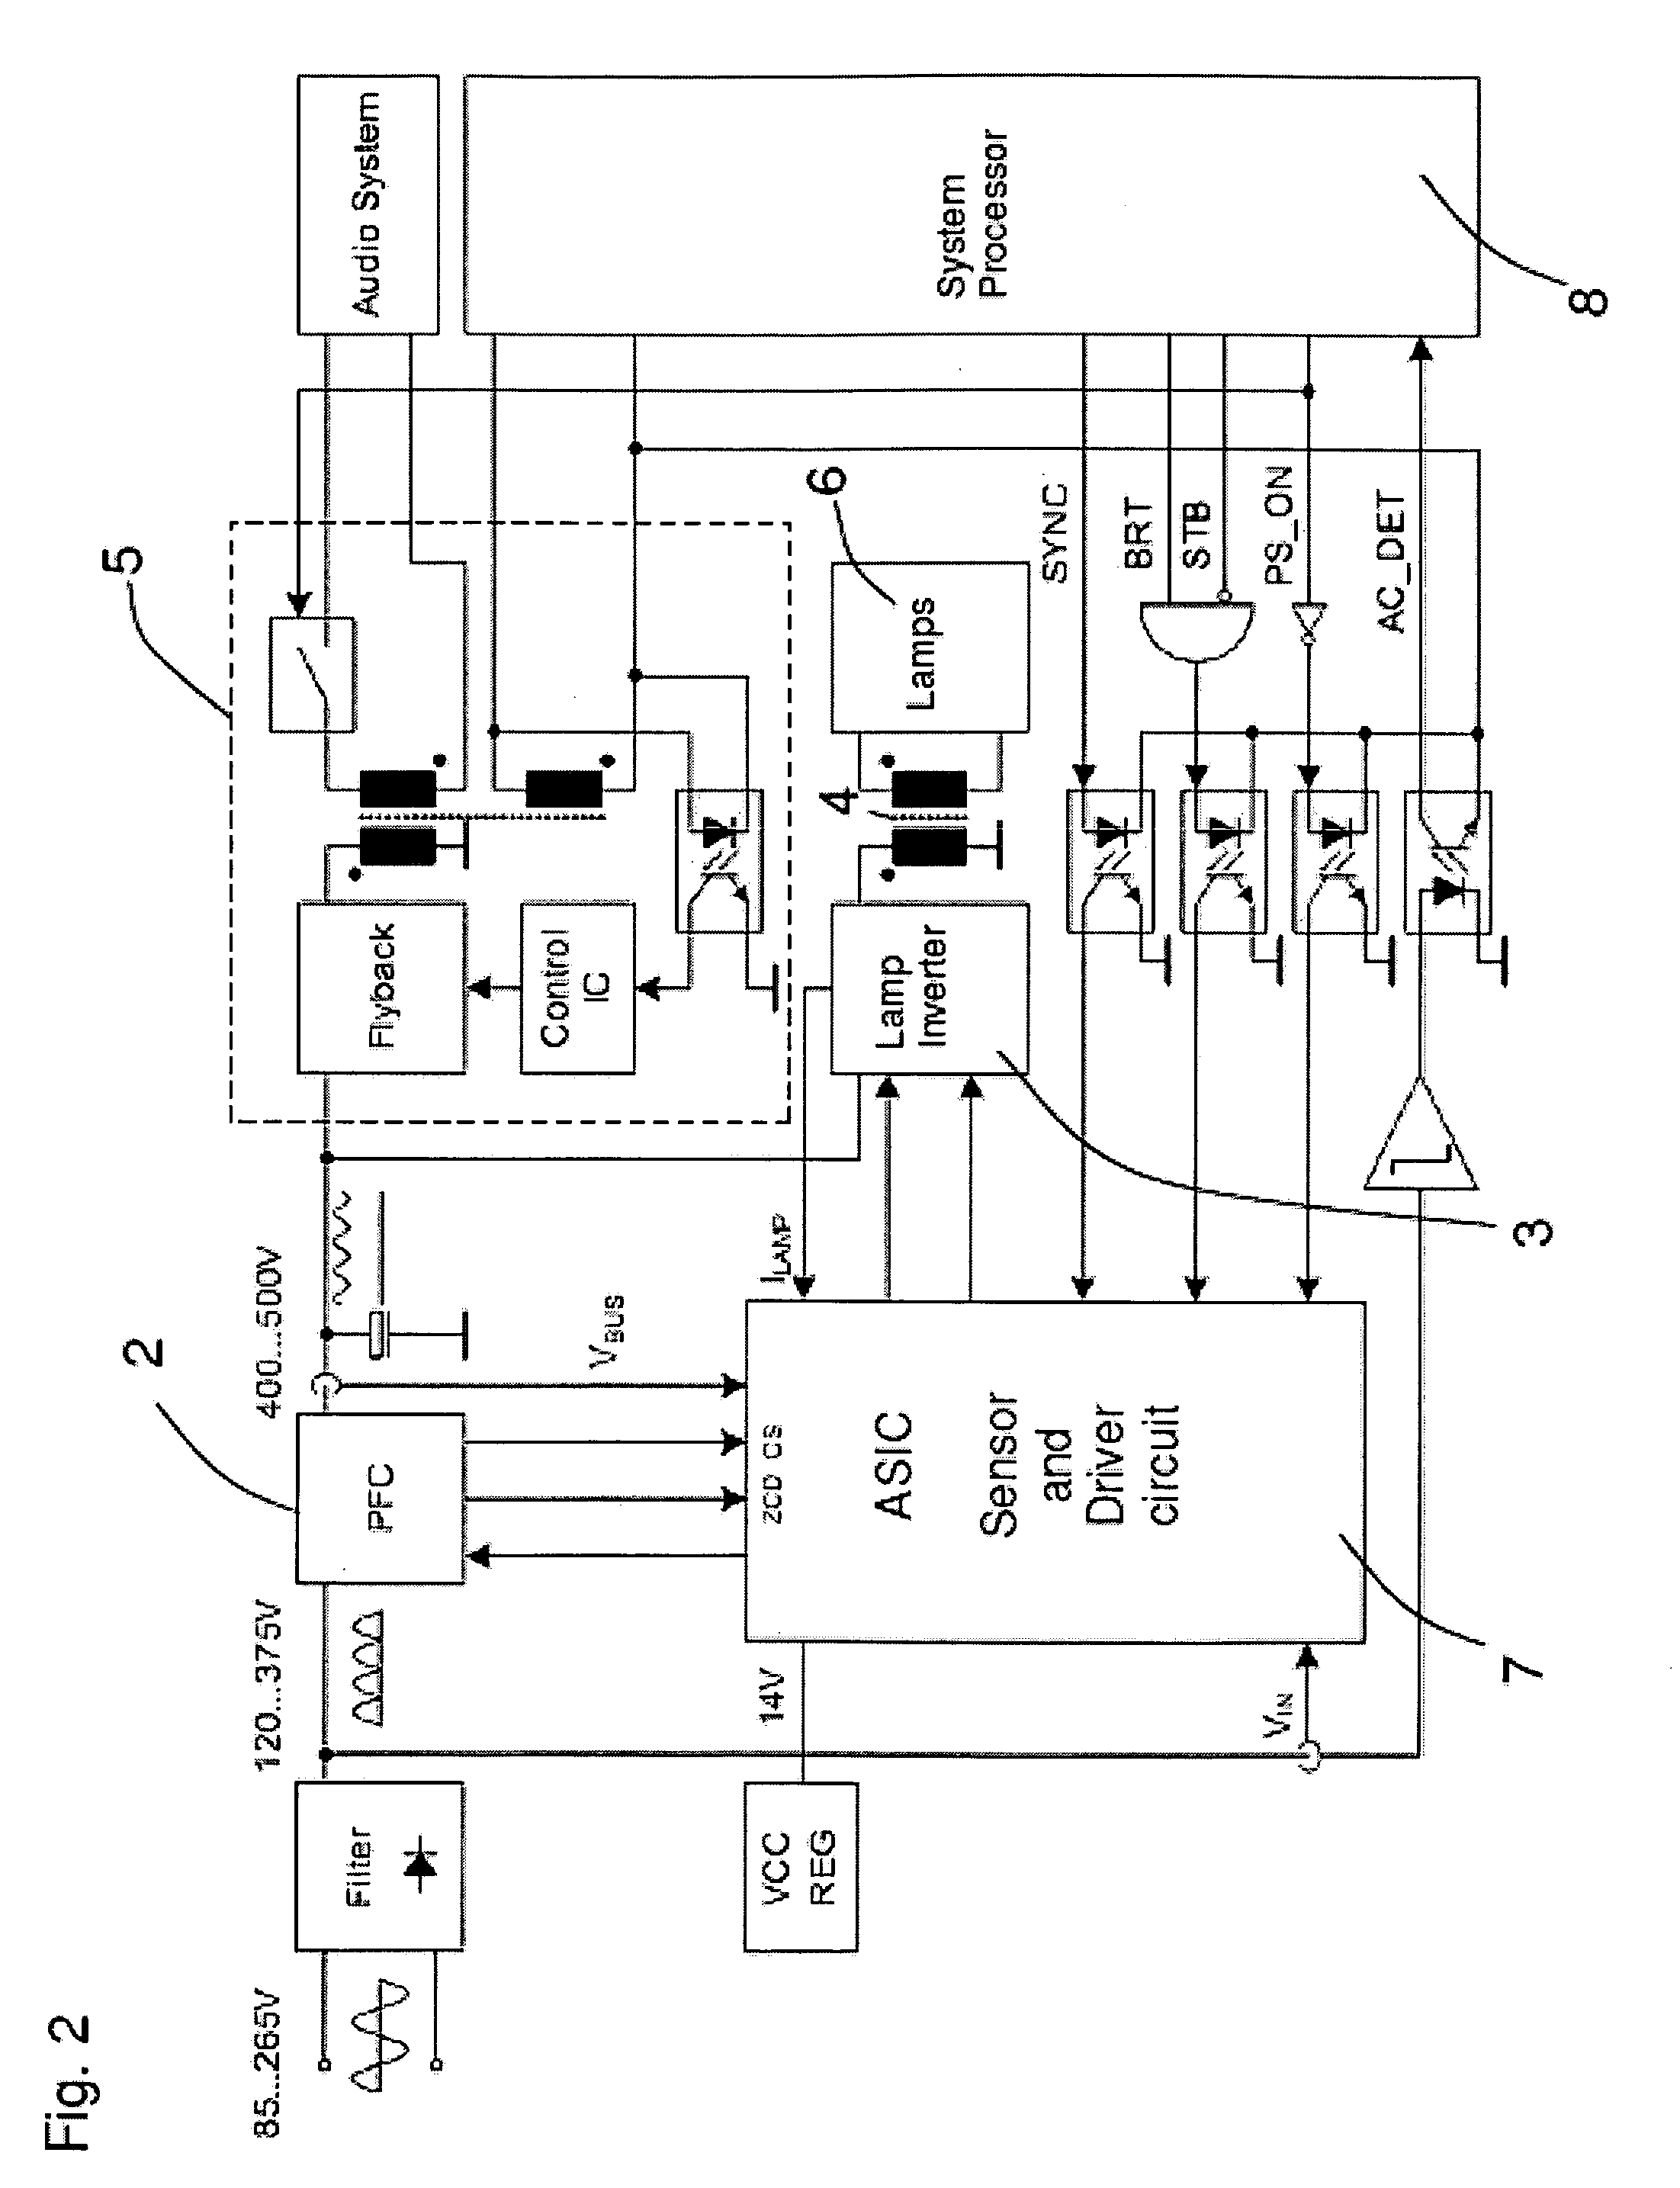 Method for controlling gas discharge lamps